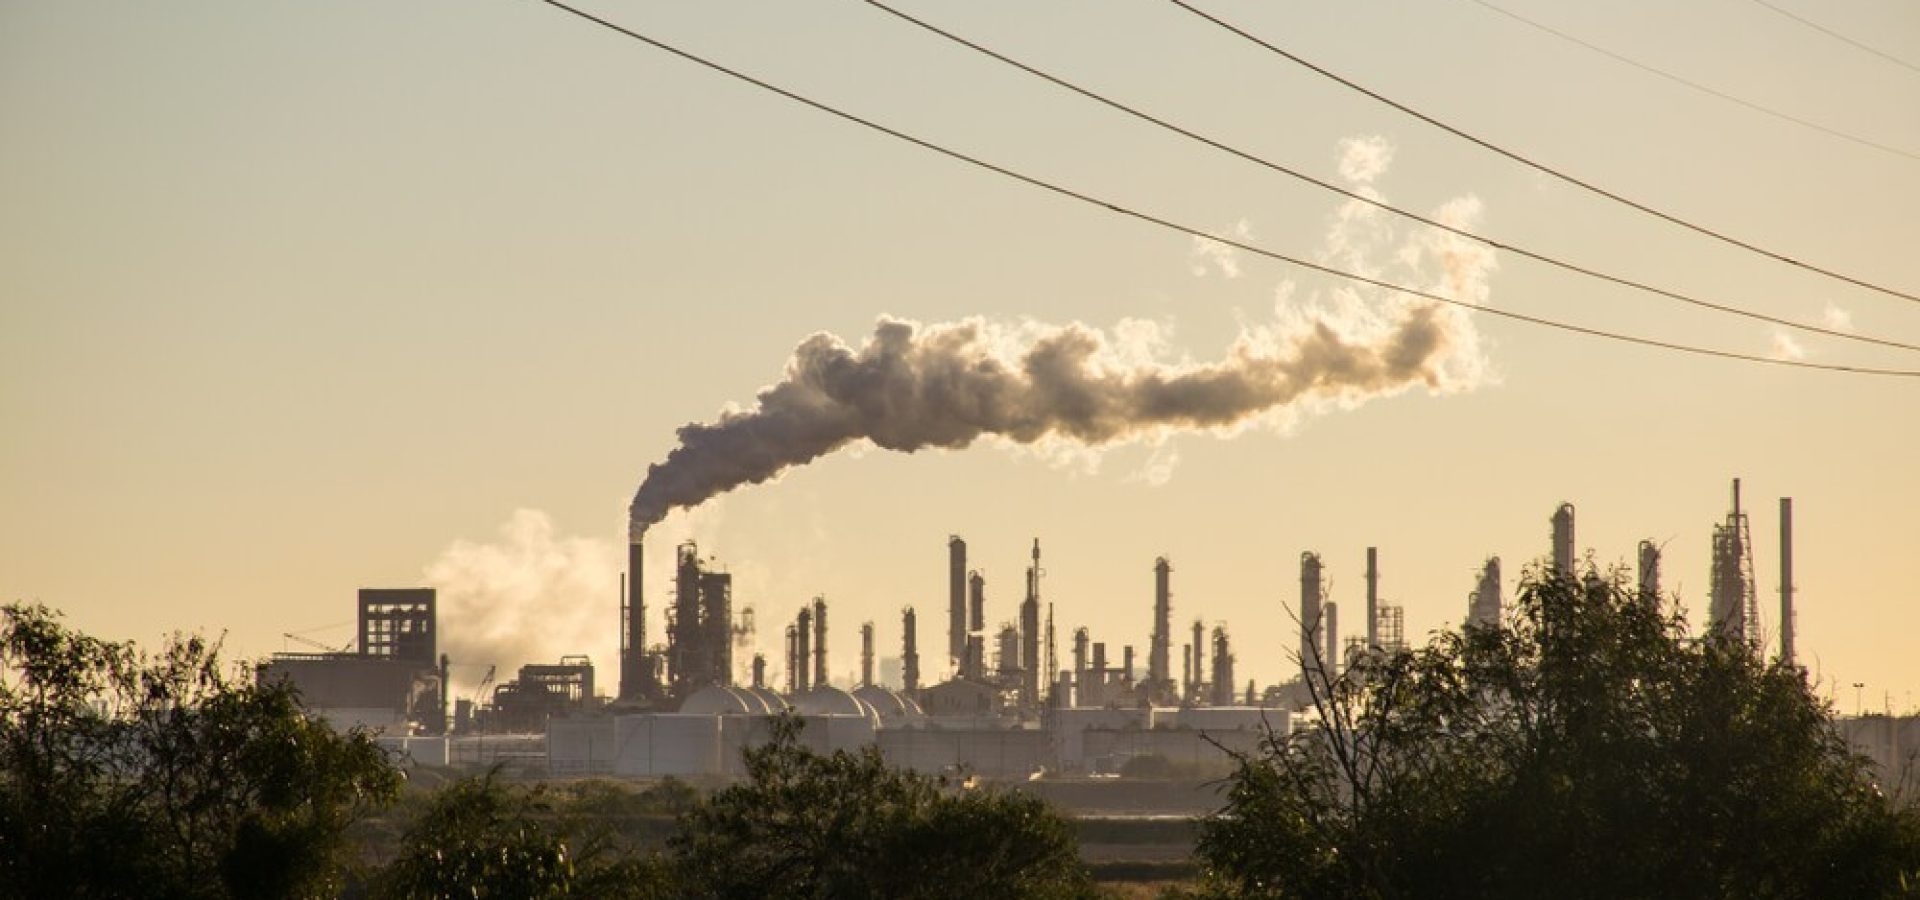 Climate Change: Oil refineries polluting carbon and cancer causing smoke stacks climate change.